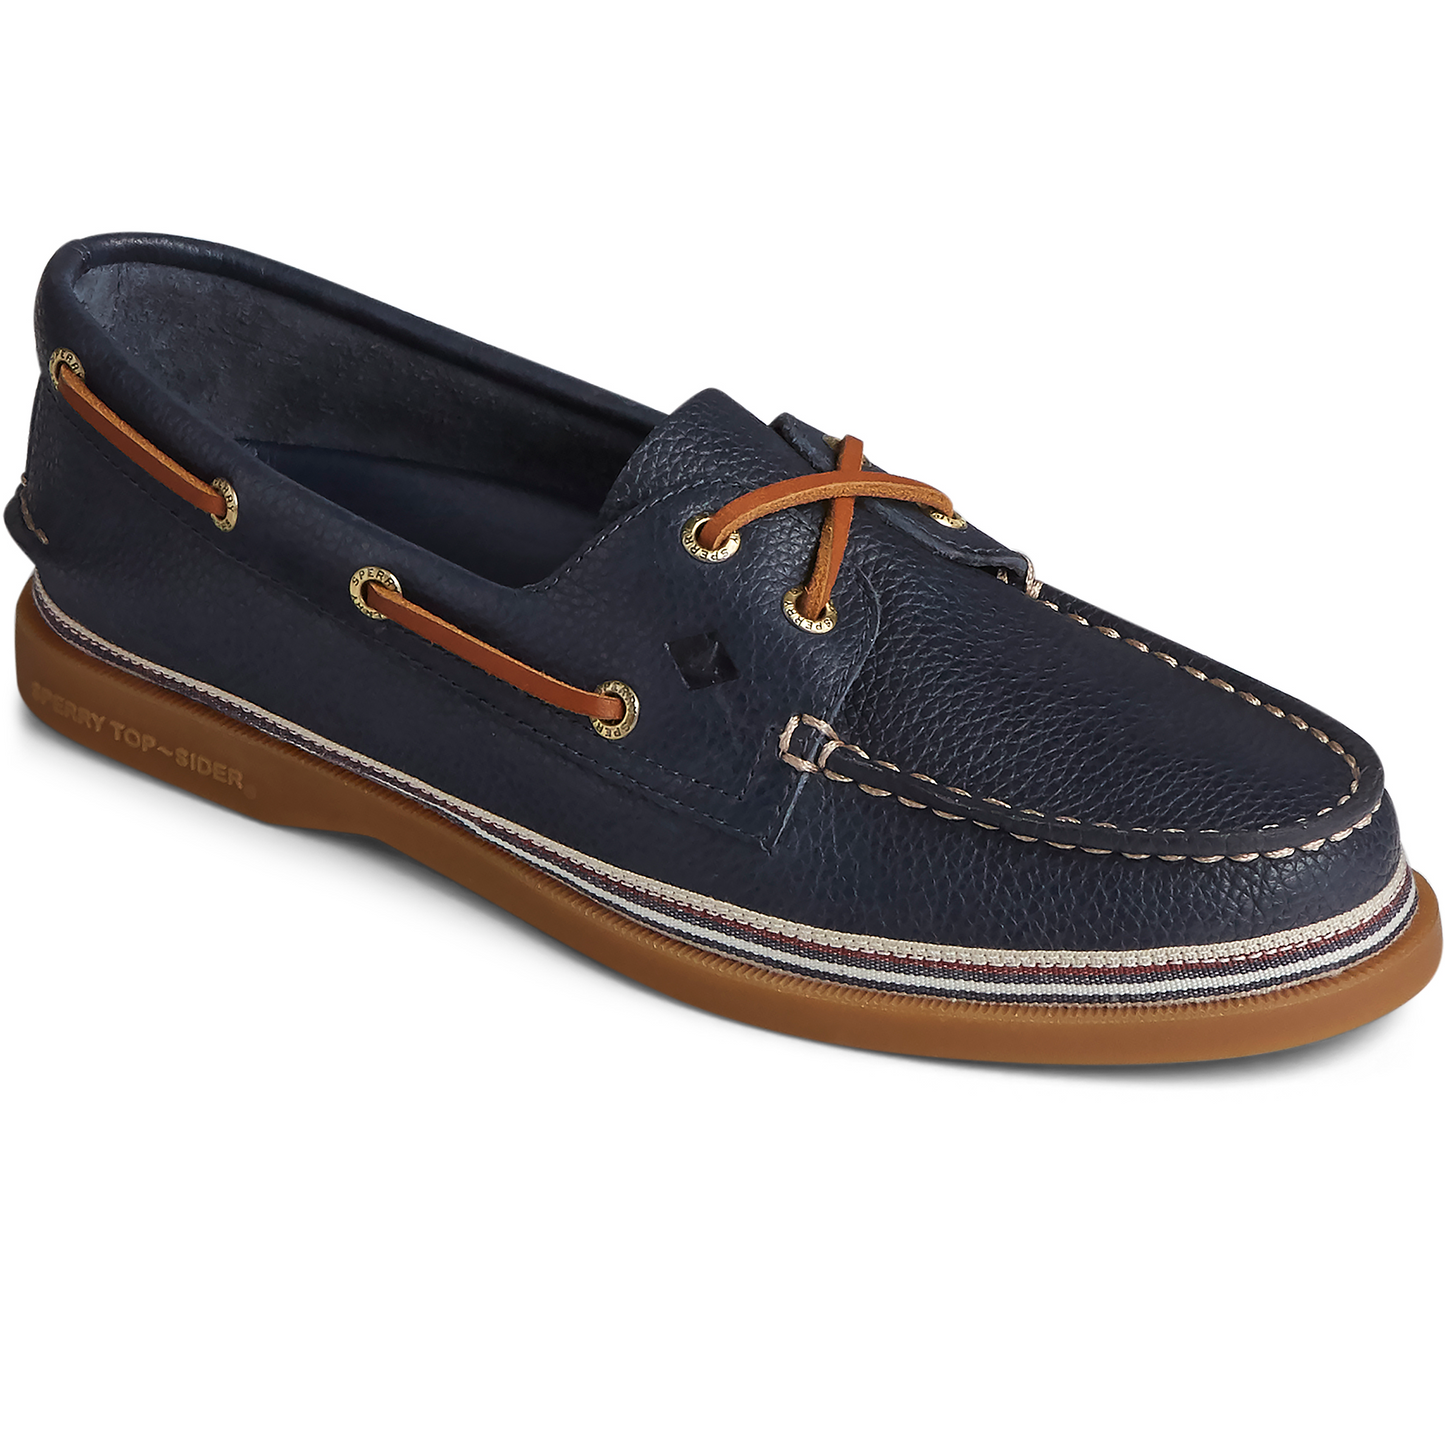 Sperry Women's Authentic Original 2-Eye Tumbled Leather Boat Shoe STS85421 (Navy)